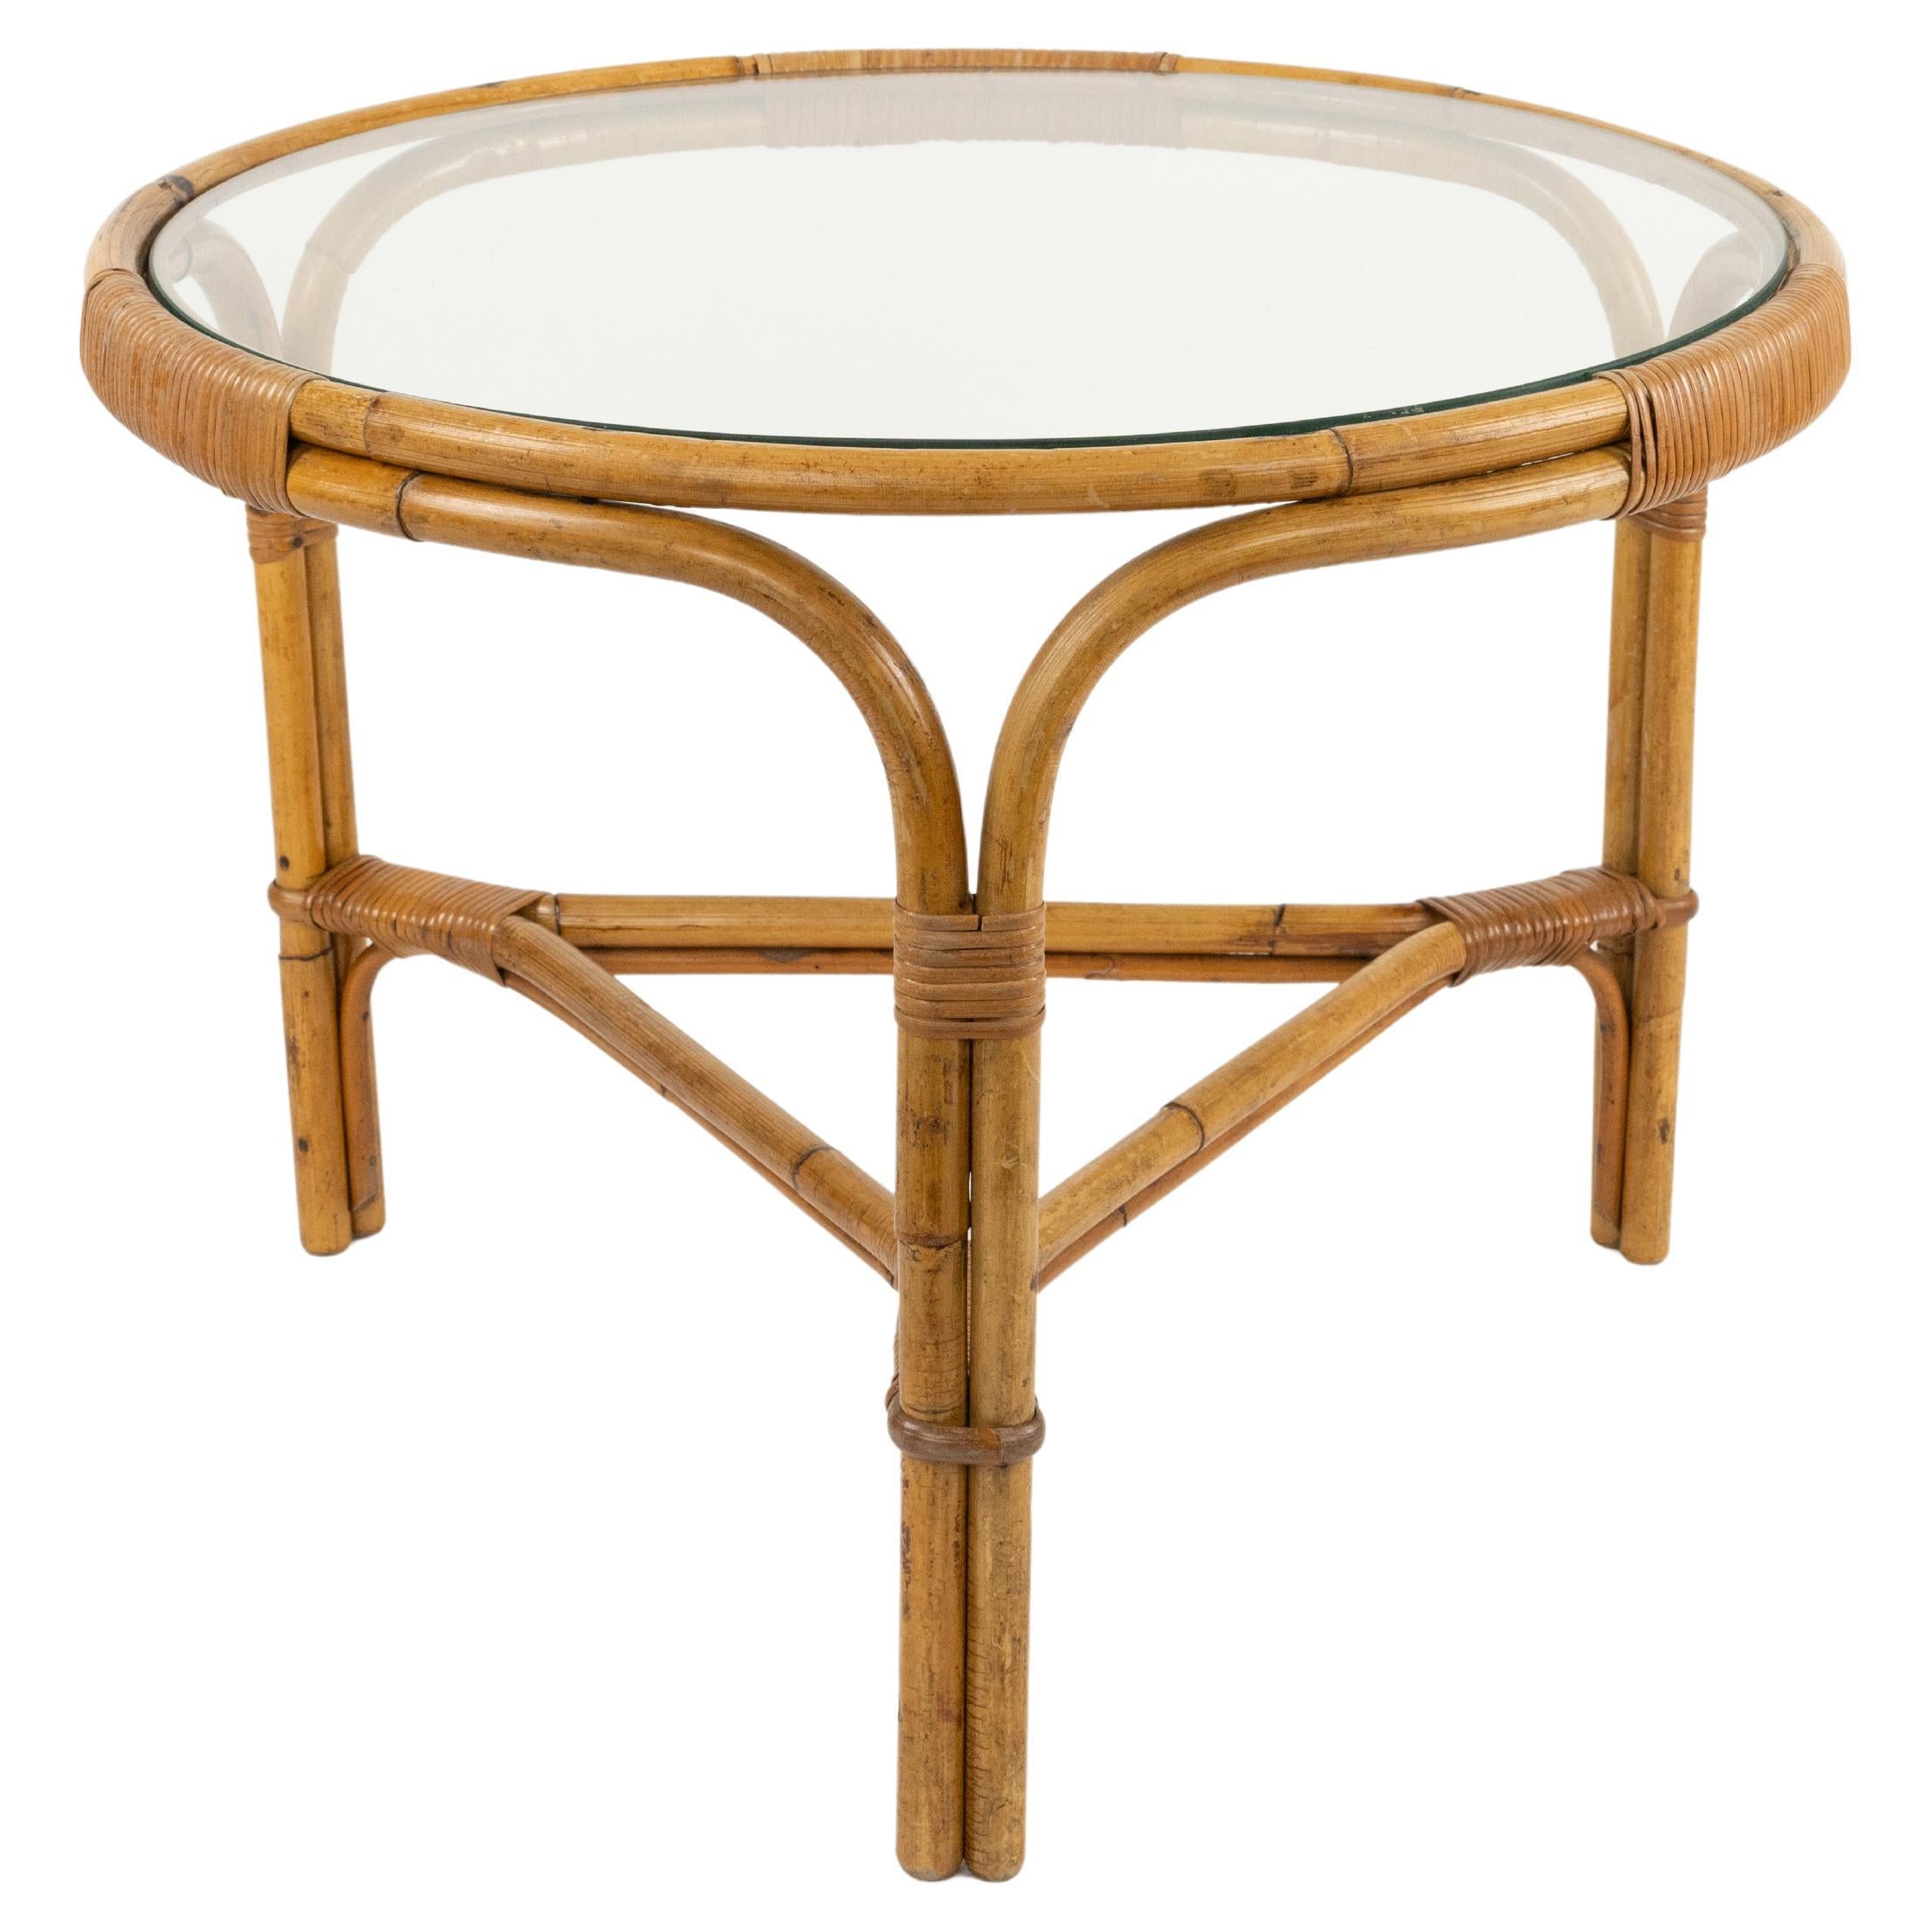 Midcentury Round Coffee Table in Bamboo, Rattan and Glass, Italy 1960s For Sale 8